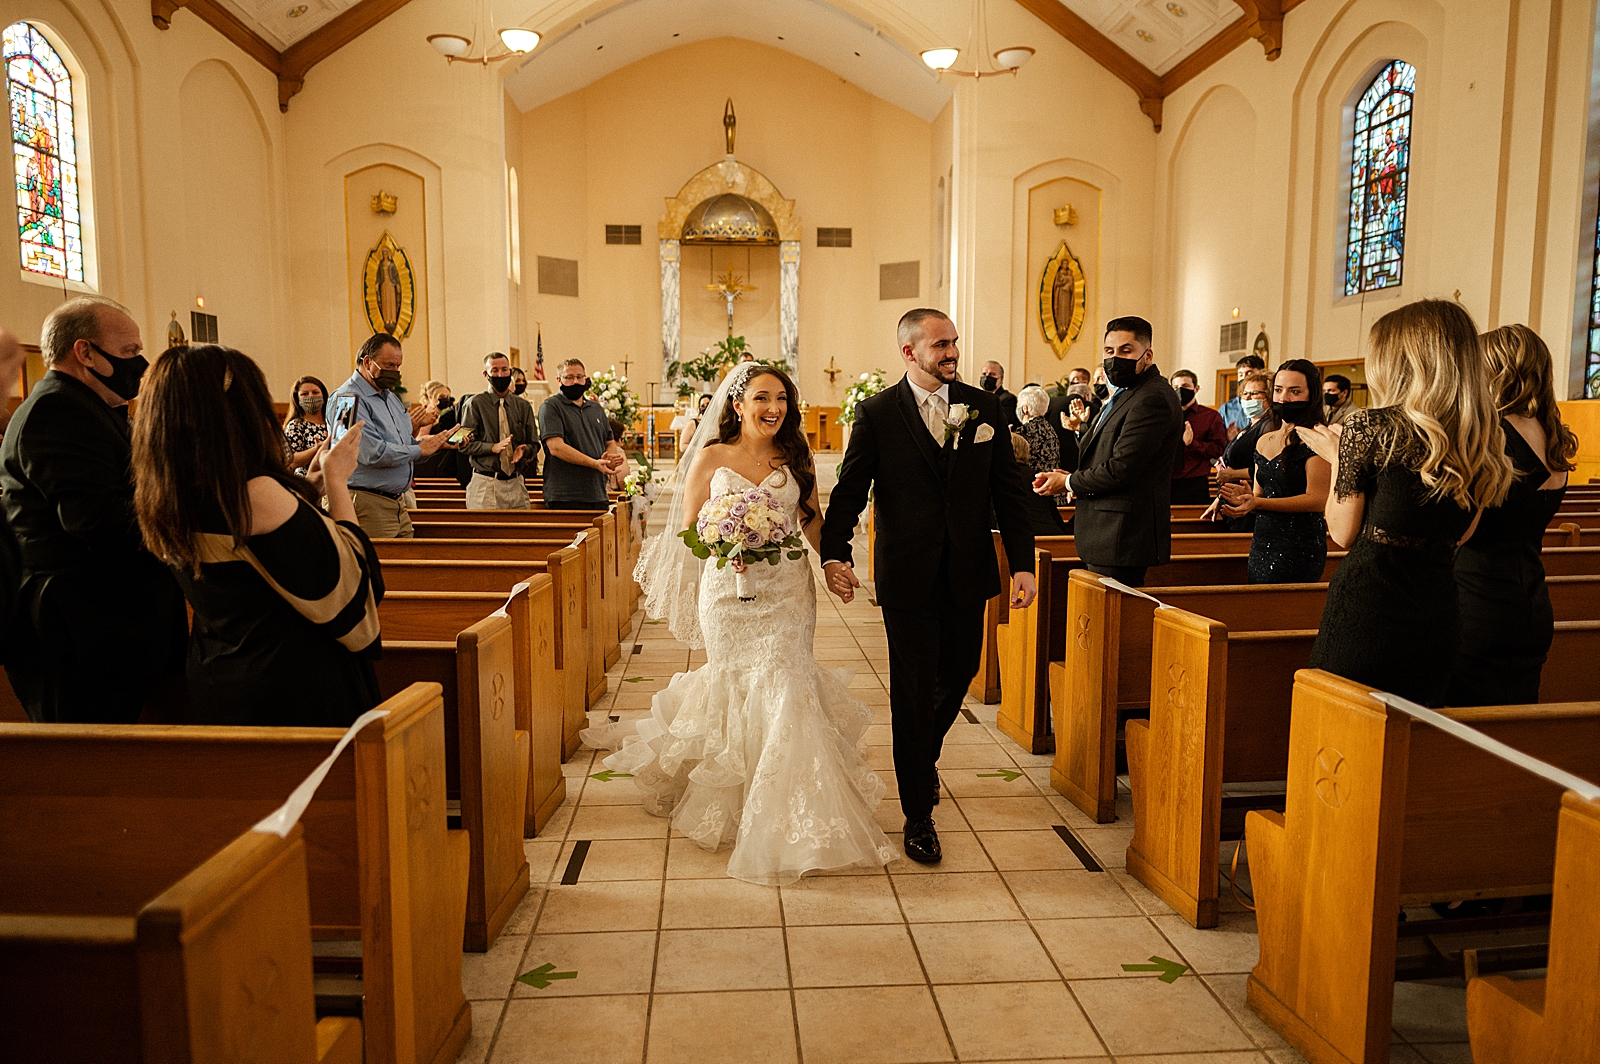 Bride and Groom walking down aisle together